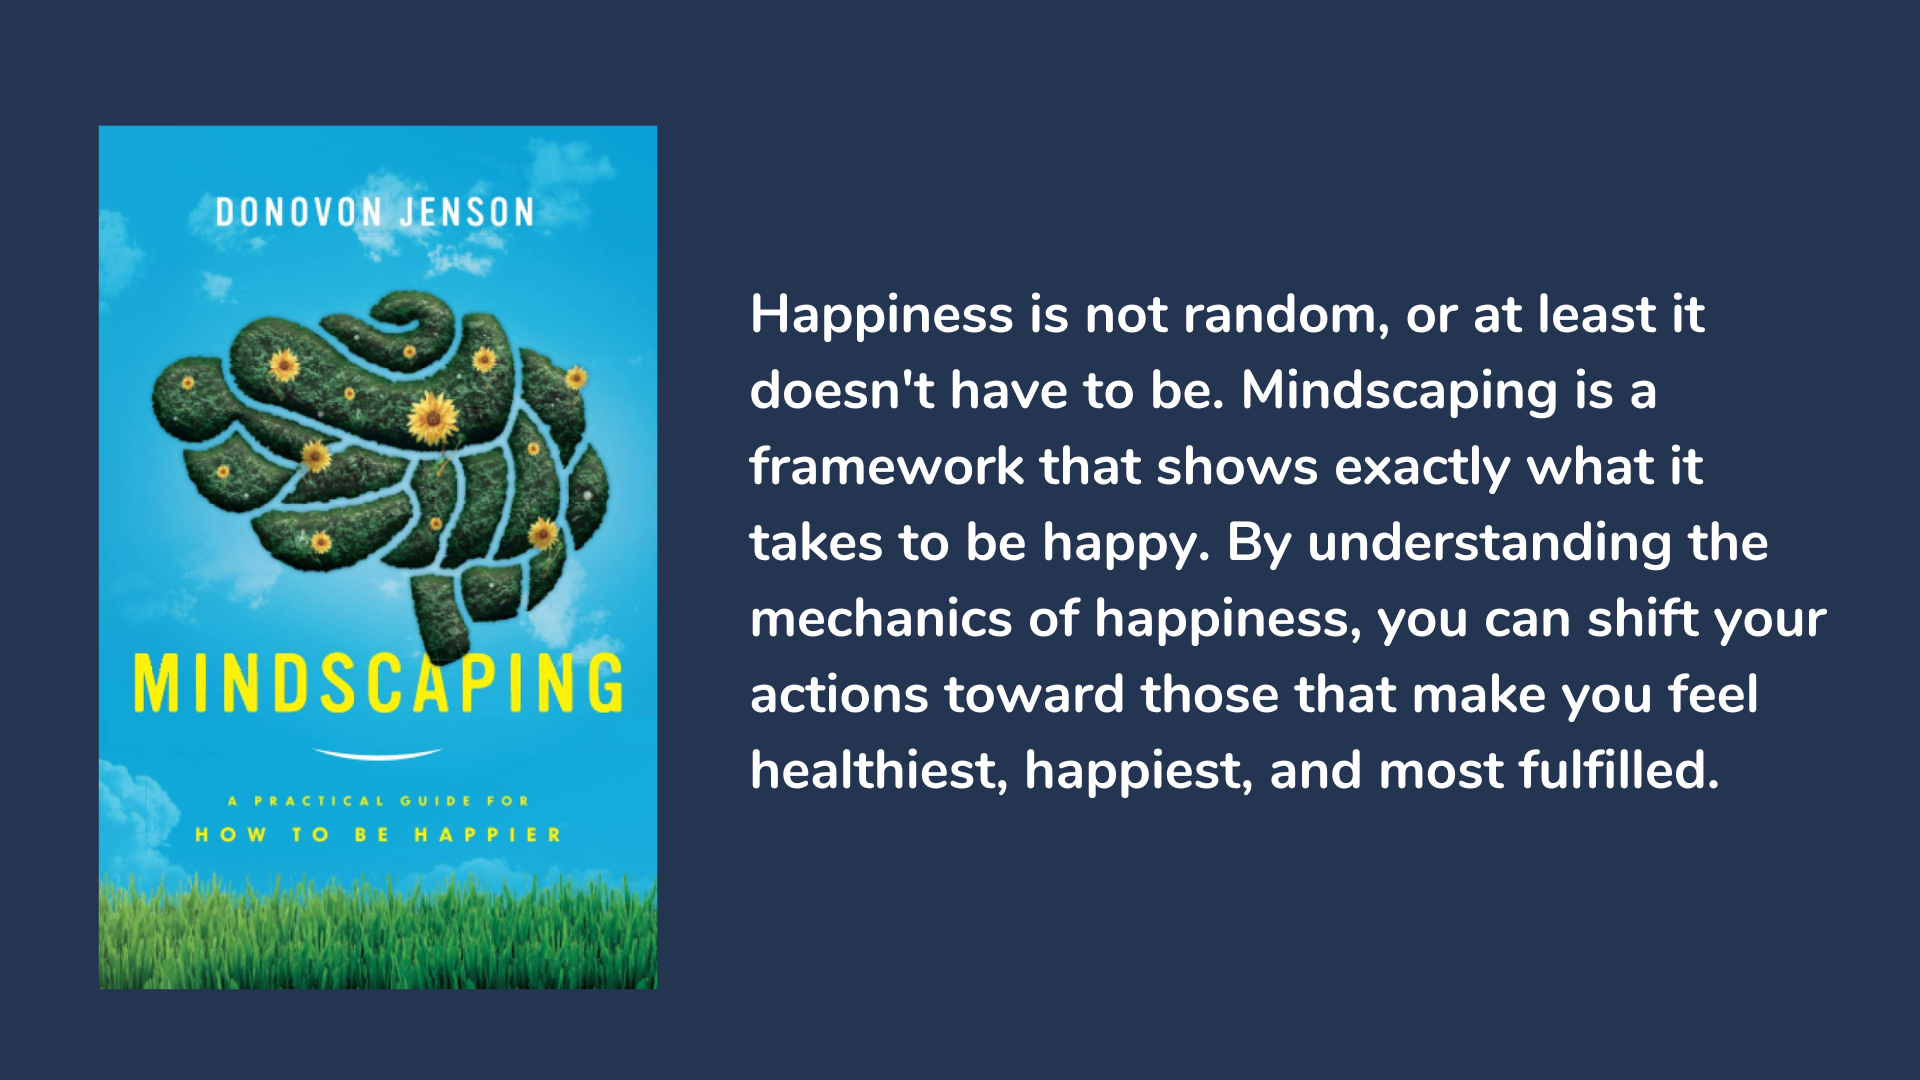 Mindscaping: A Practical Guide For How To Be Happier, book cover and description.